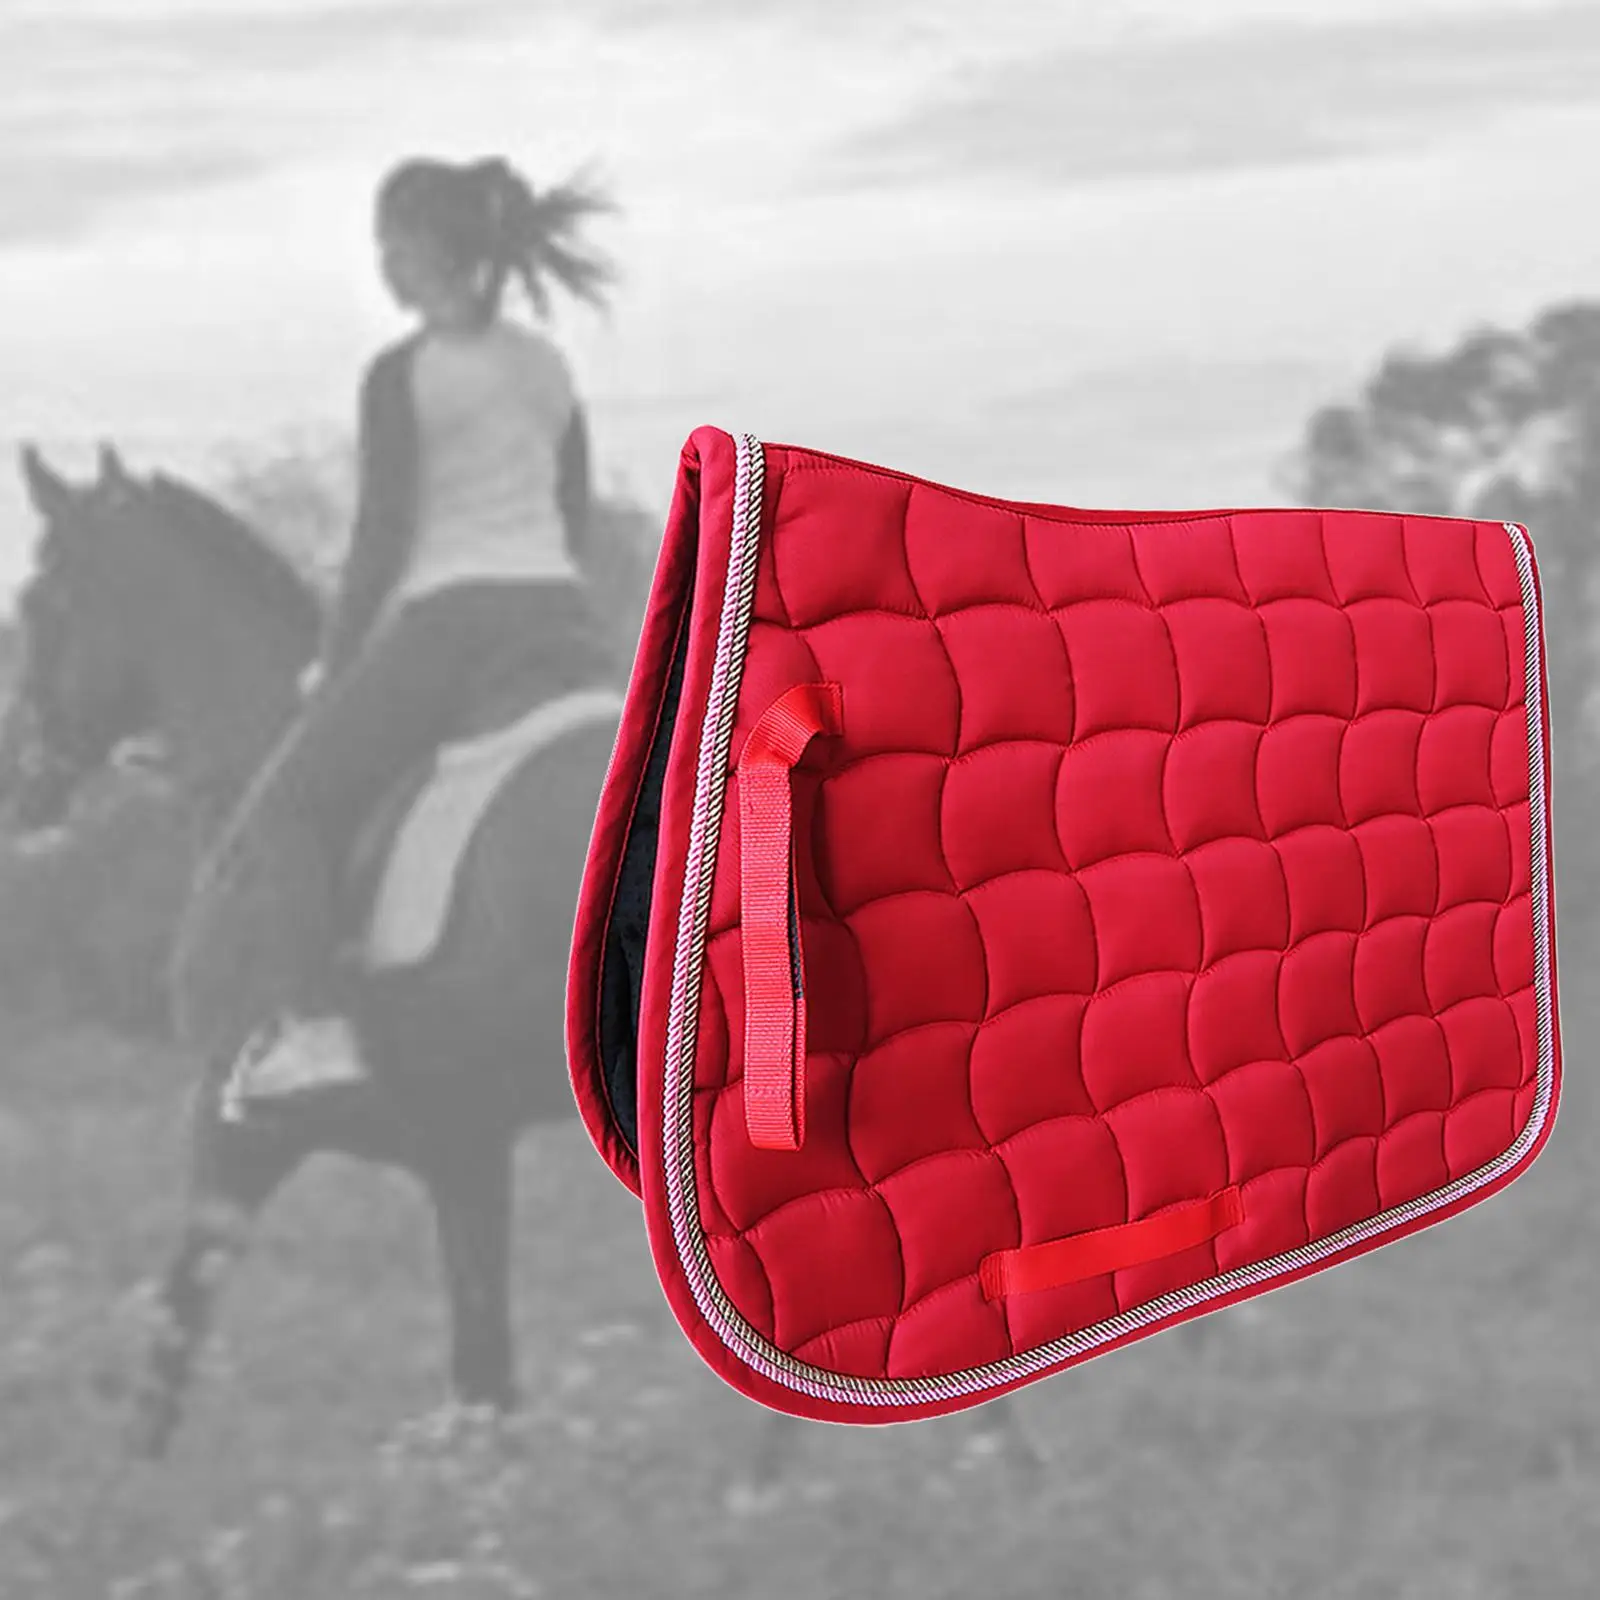  Saddle Pad English  Equestrian Protective for Sports